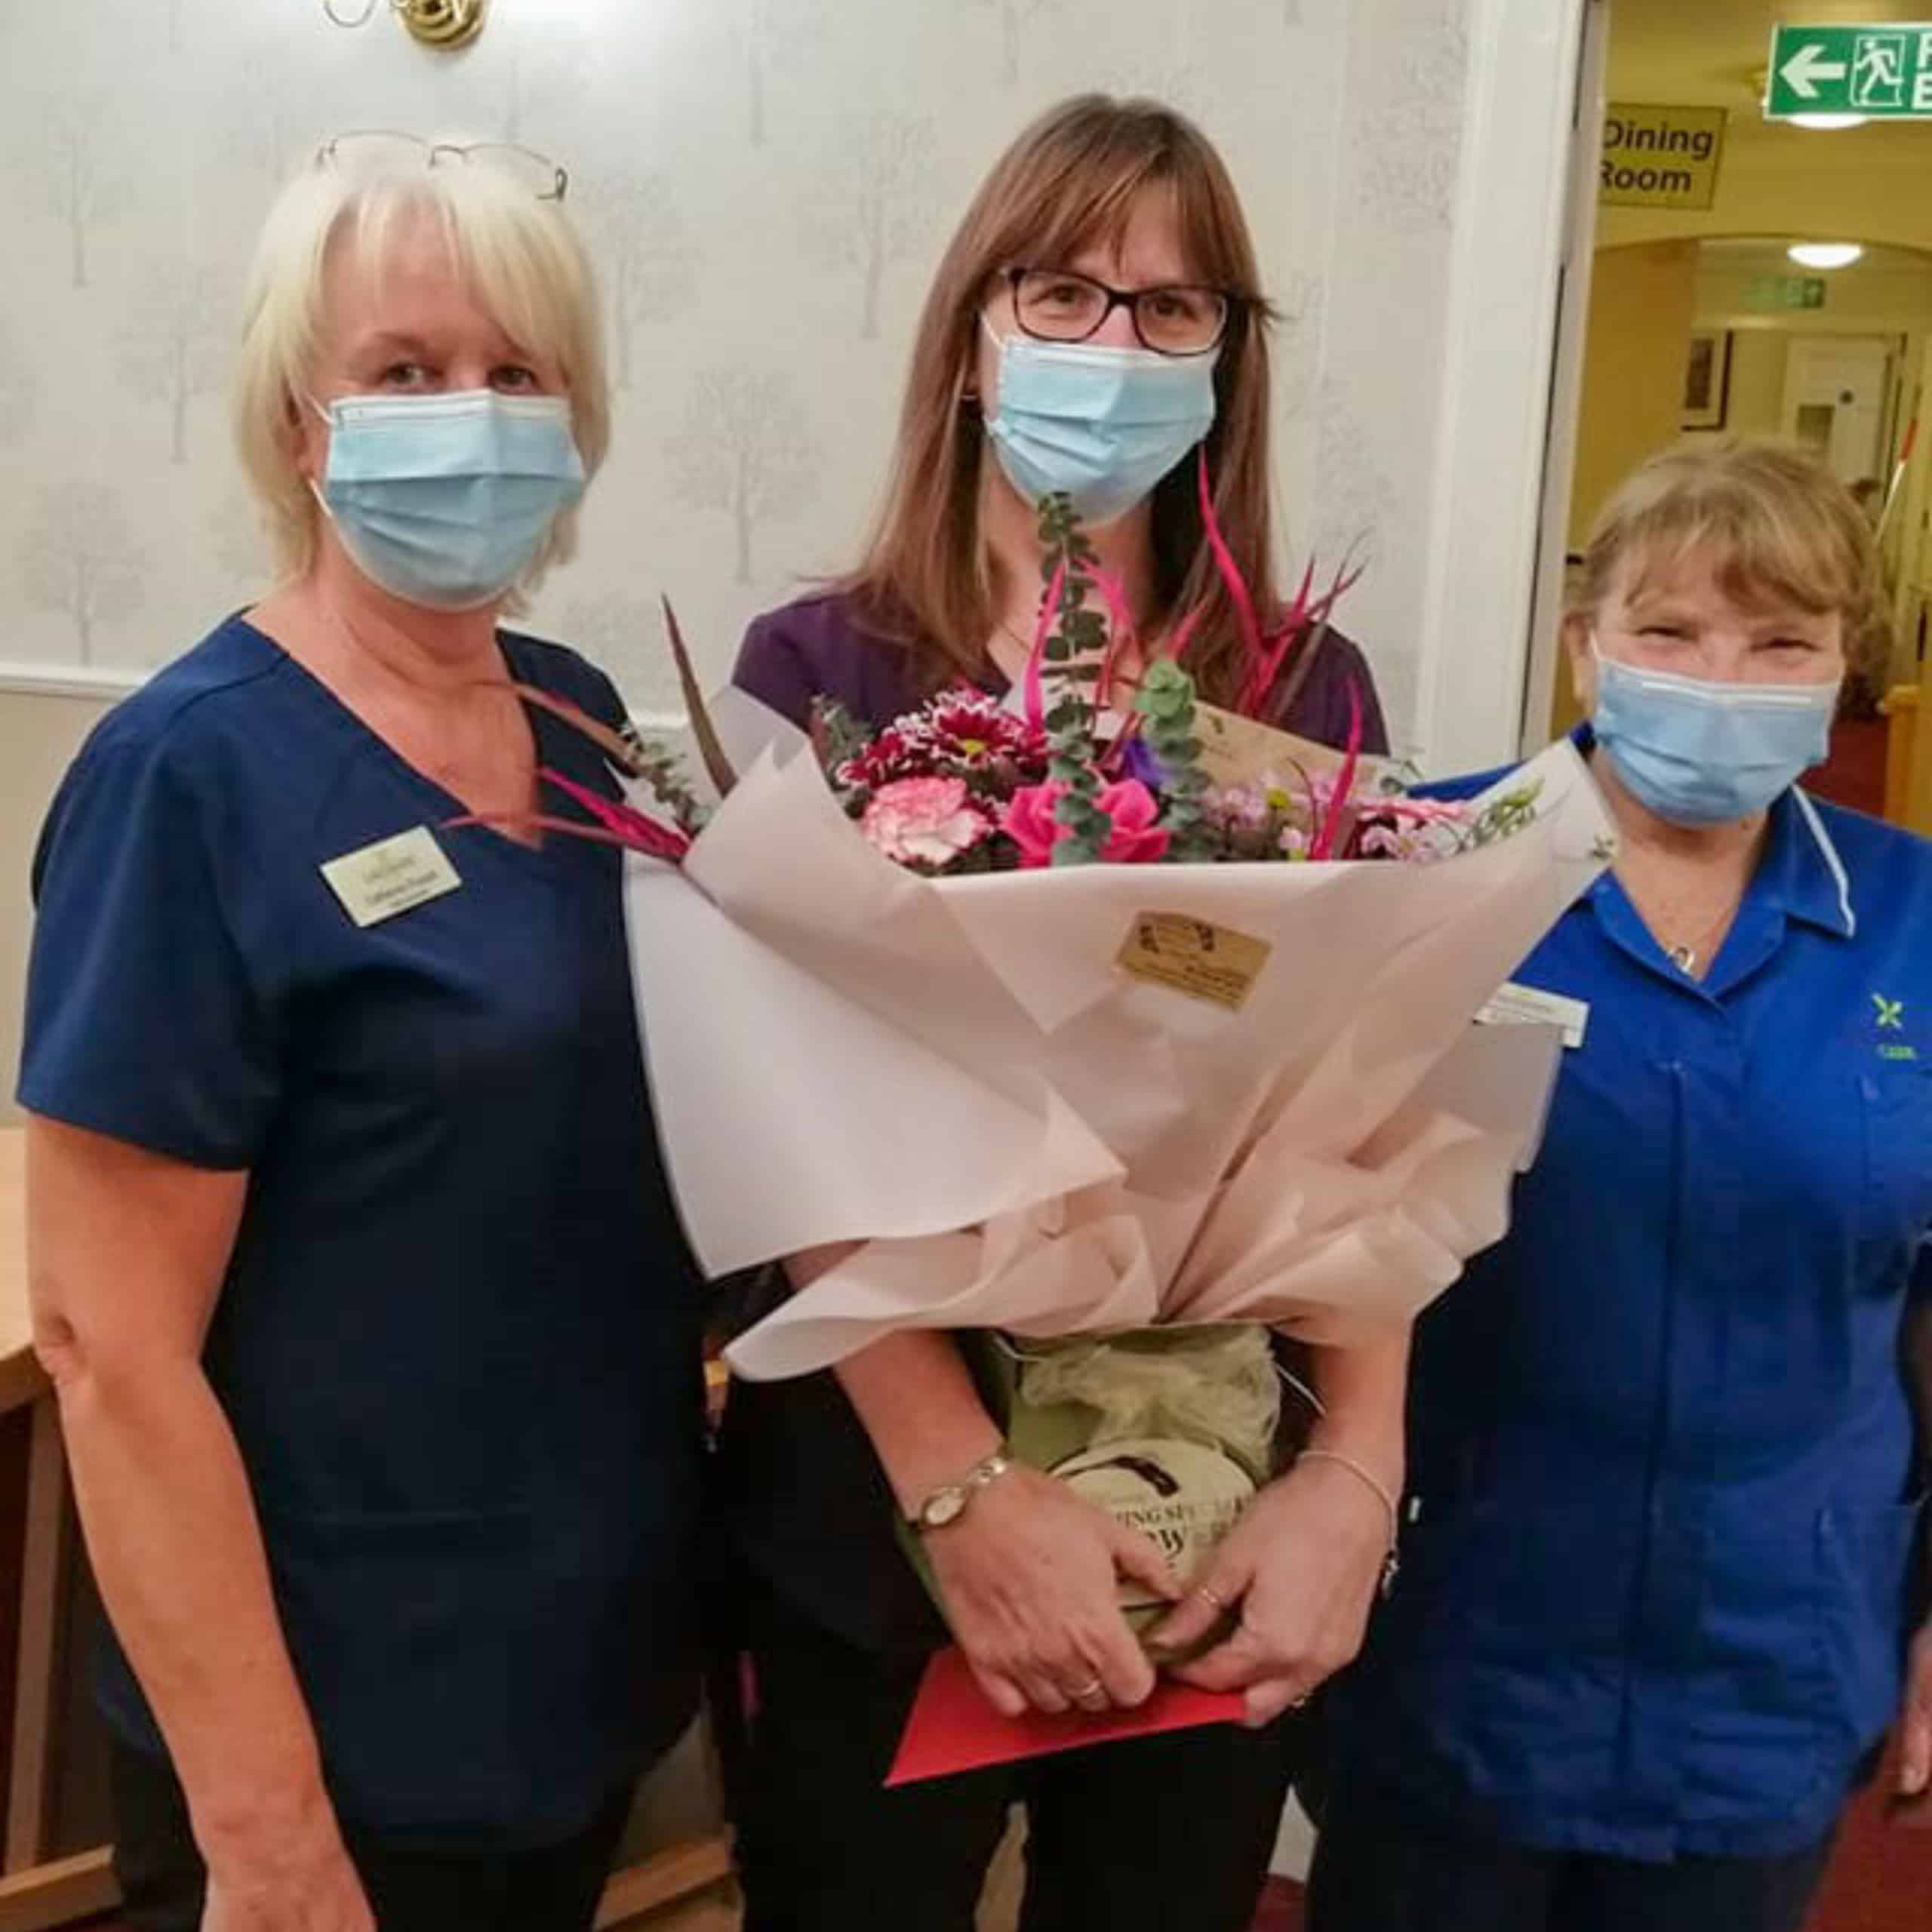 Muirton House Care Home's administrator Gill Rennie celebrates 20 years of continued service with a certificate and flowers from her colleagues.